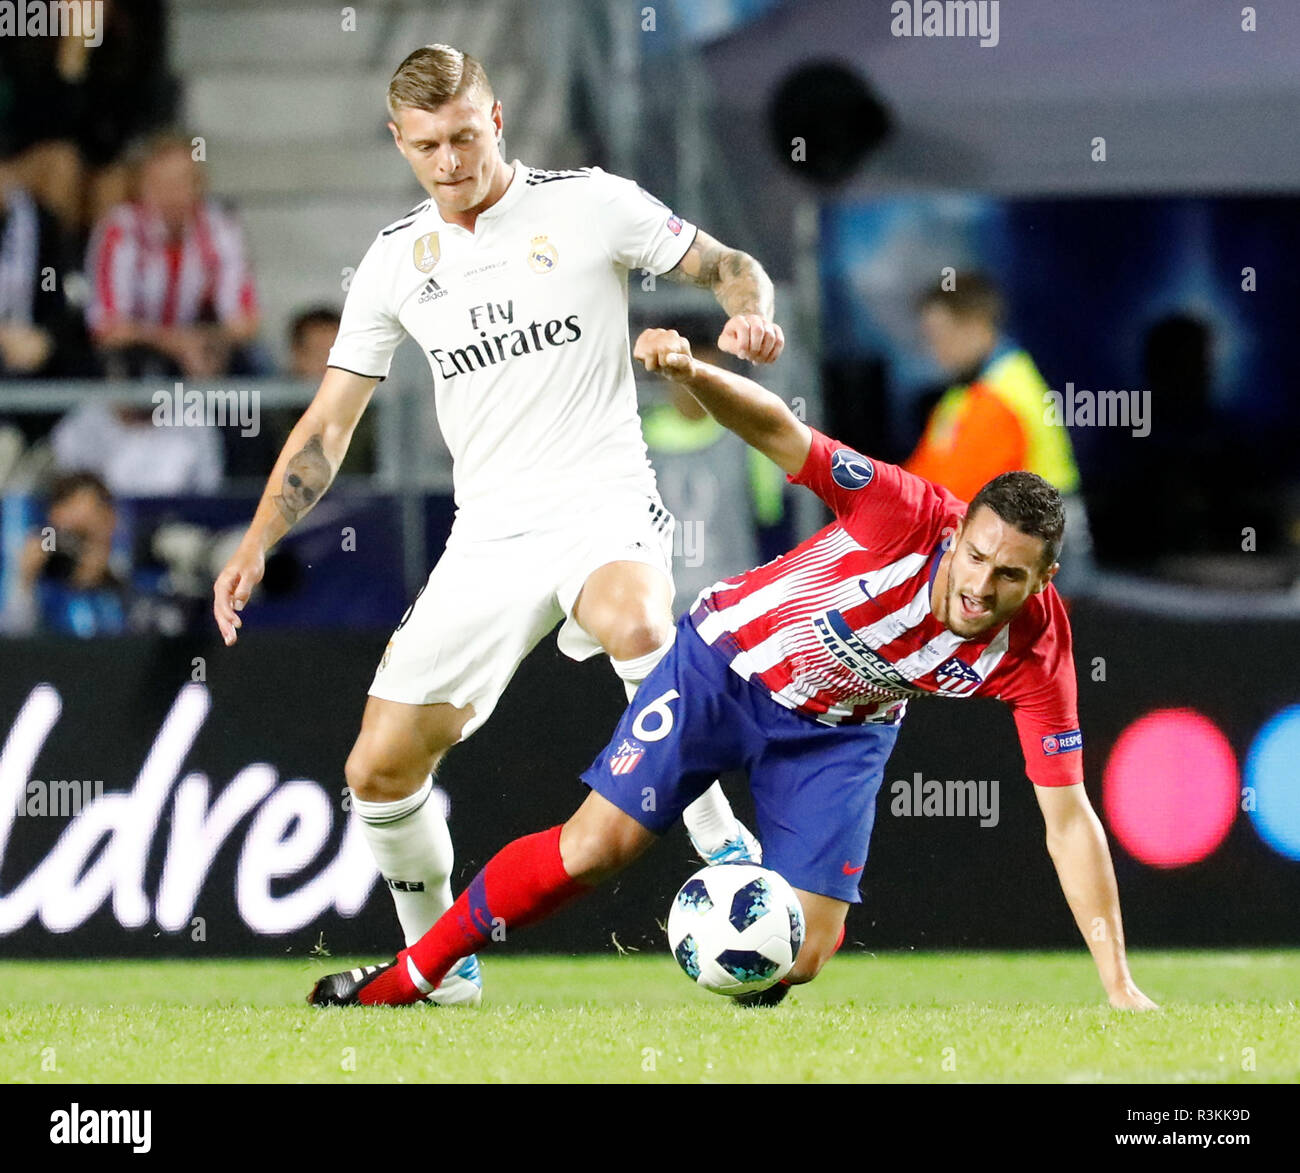 TALLINN, ESTONIA - AUGUST 15: Toni Kroos (L) of Real Madrid and Koke of Atletico Madrid vie for the ball during the UEFA Super Cup match between Real Madrid and Atletico Madrid at A Le Coq Arena on August 15, 2018 in Tallinn, Estonia. (MB Media) Stock Photo